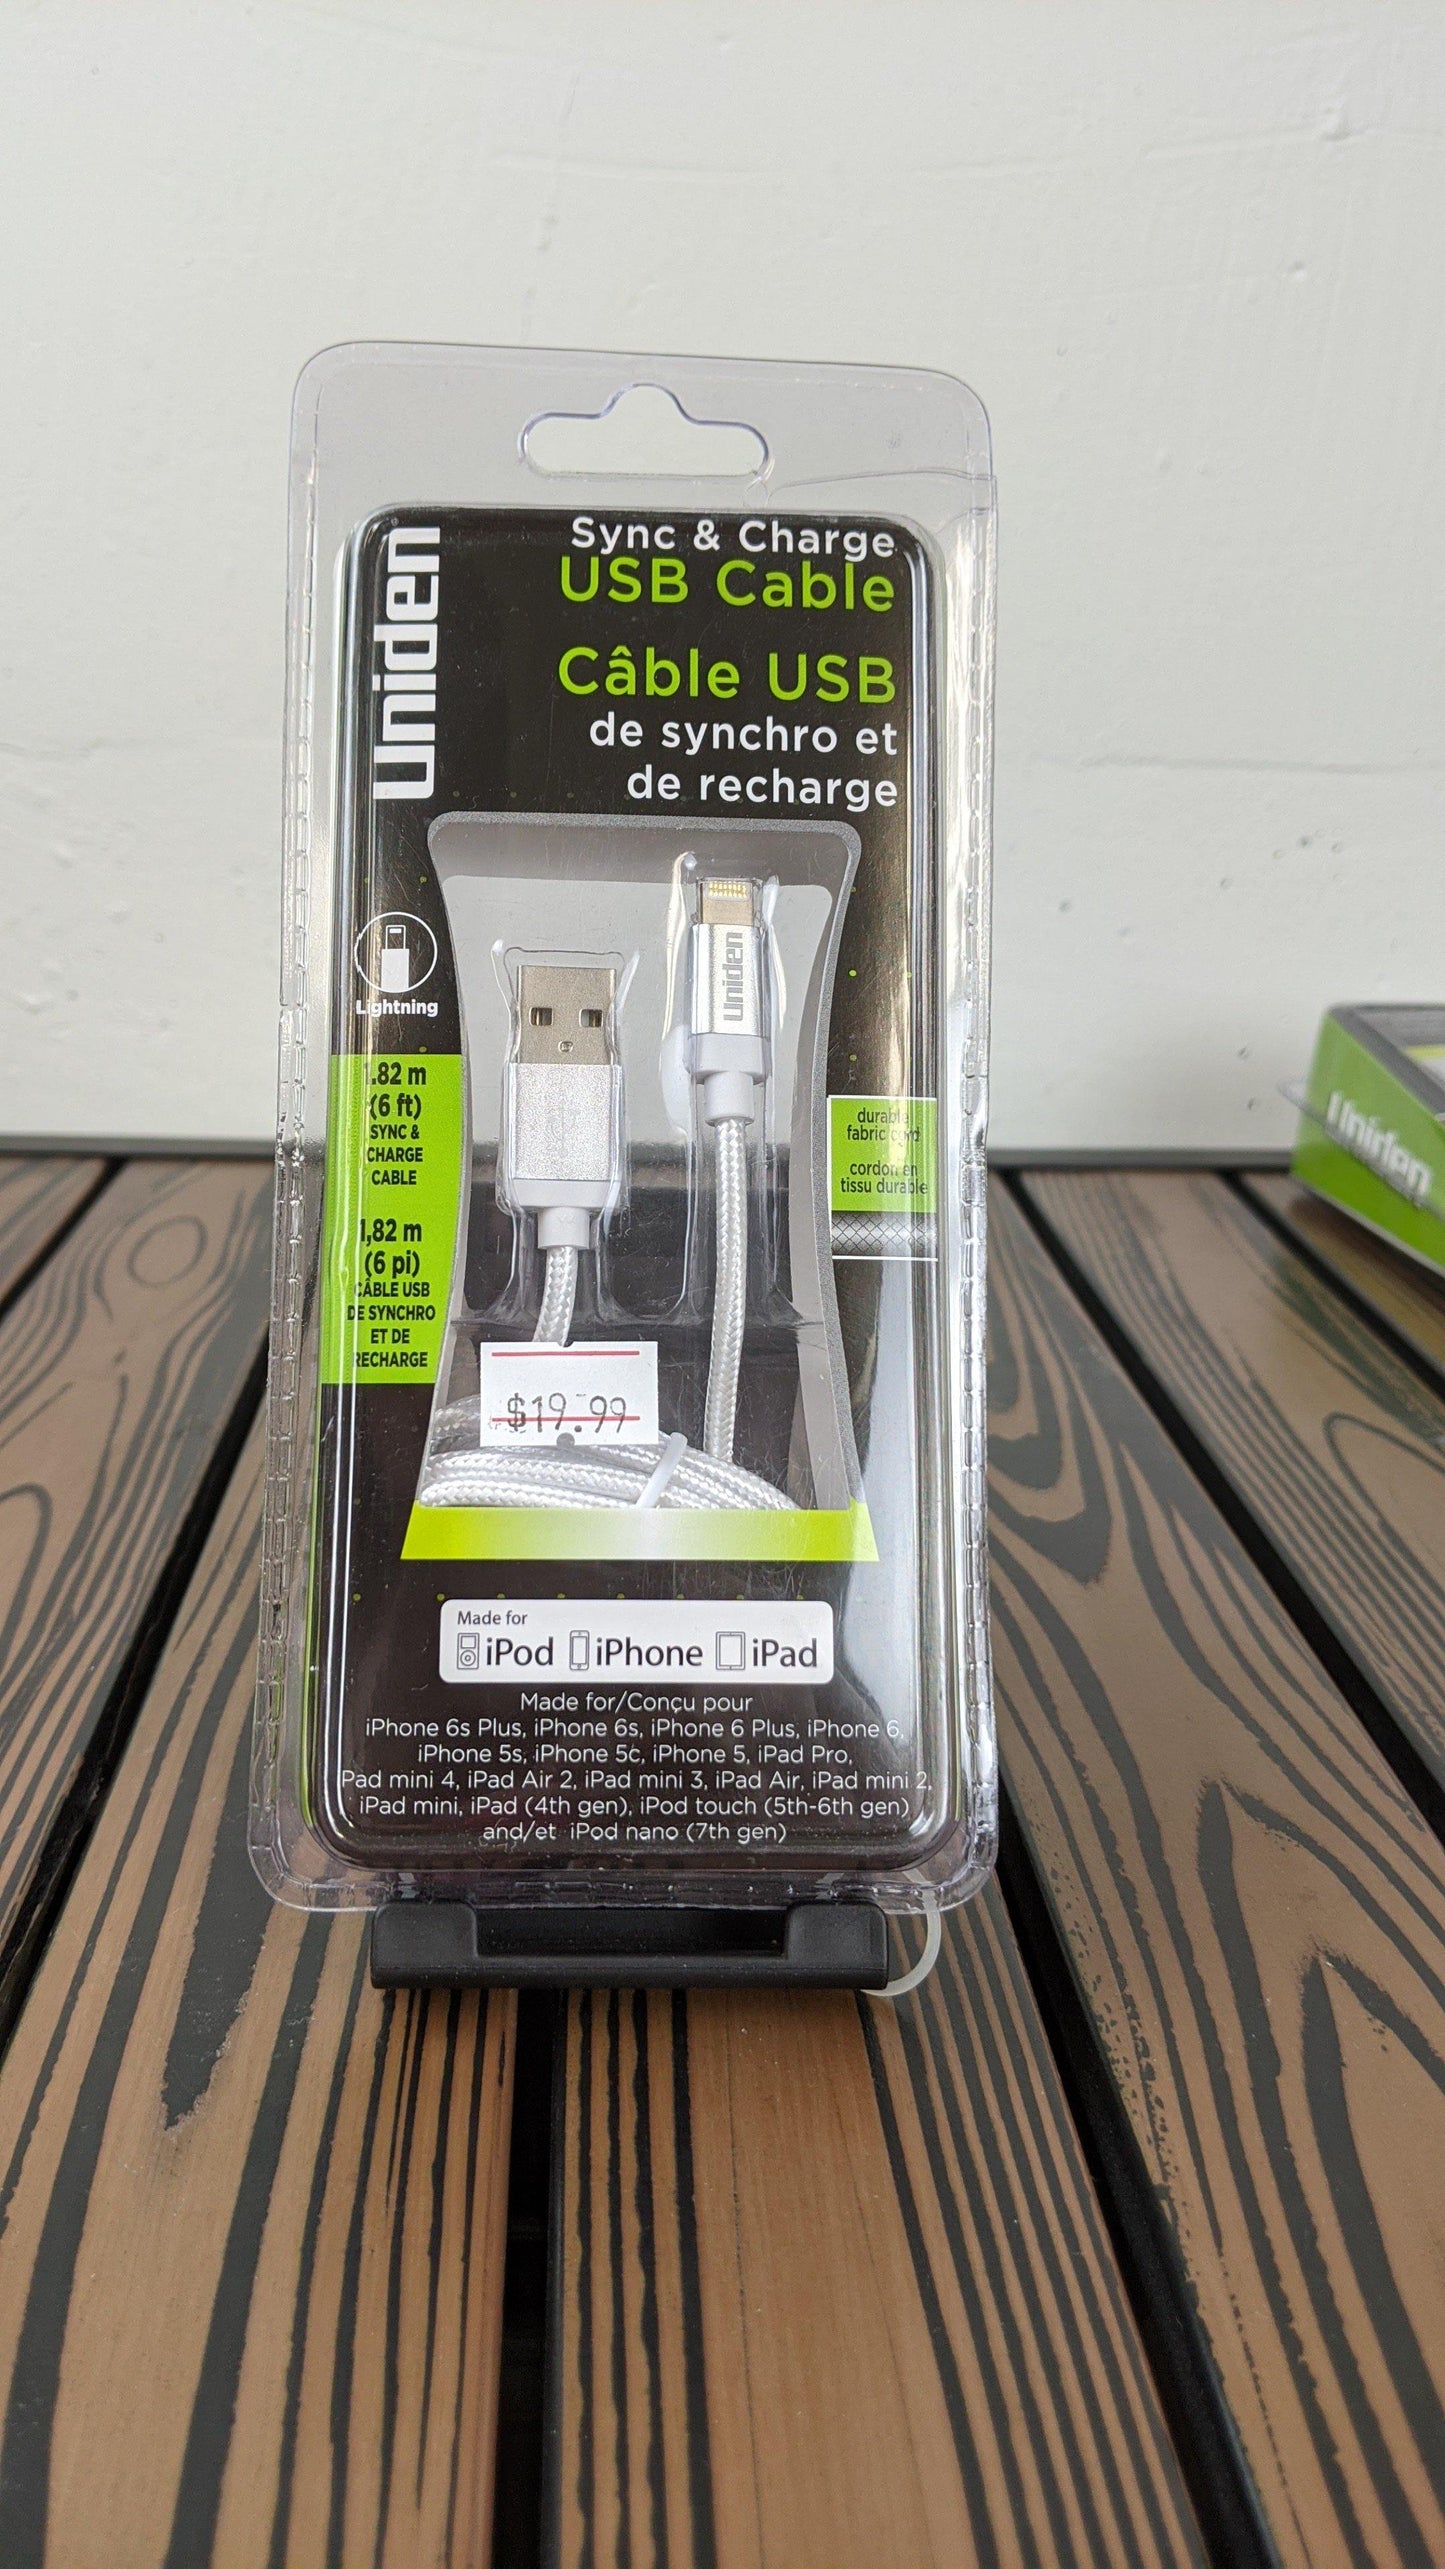 Uniden Lightning Cable - PCMaster Pro 